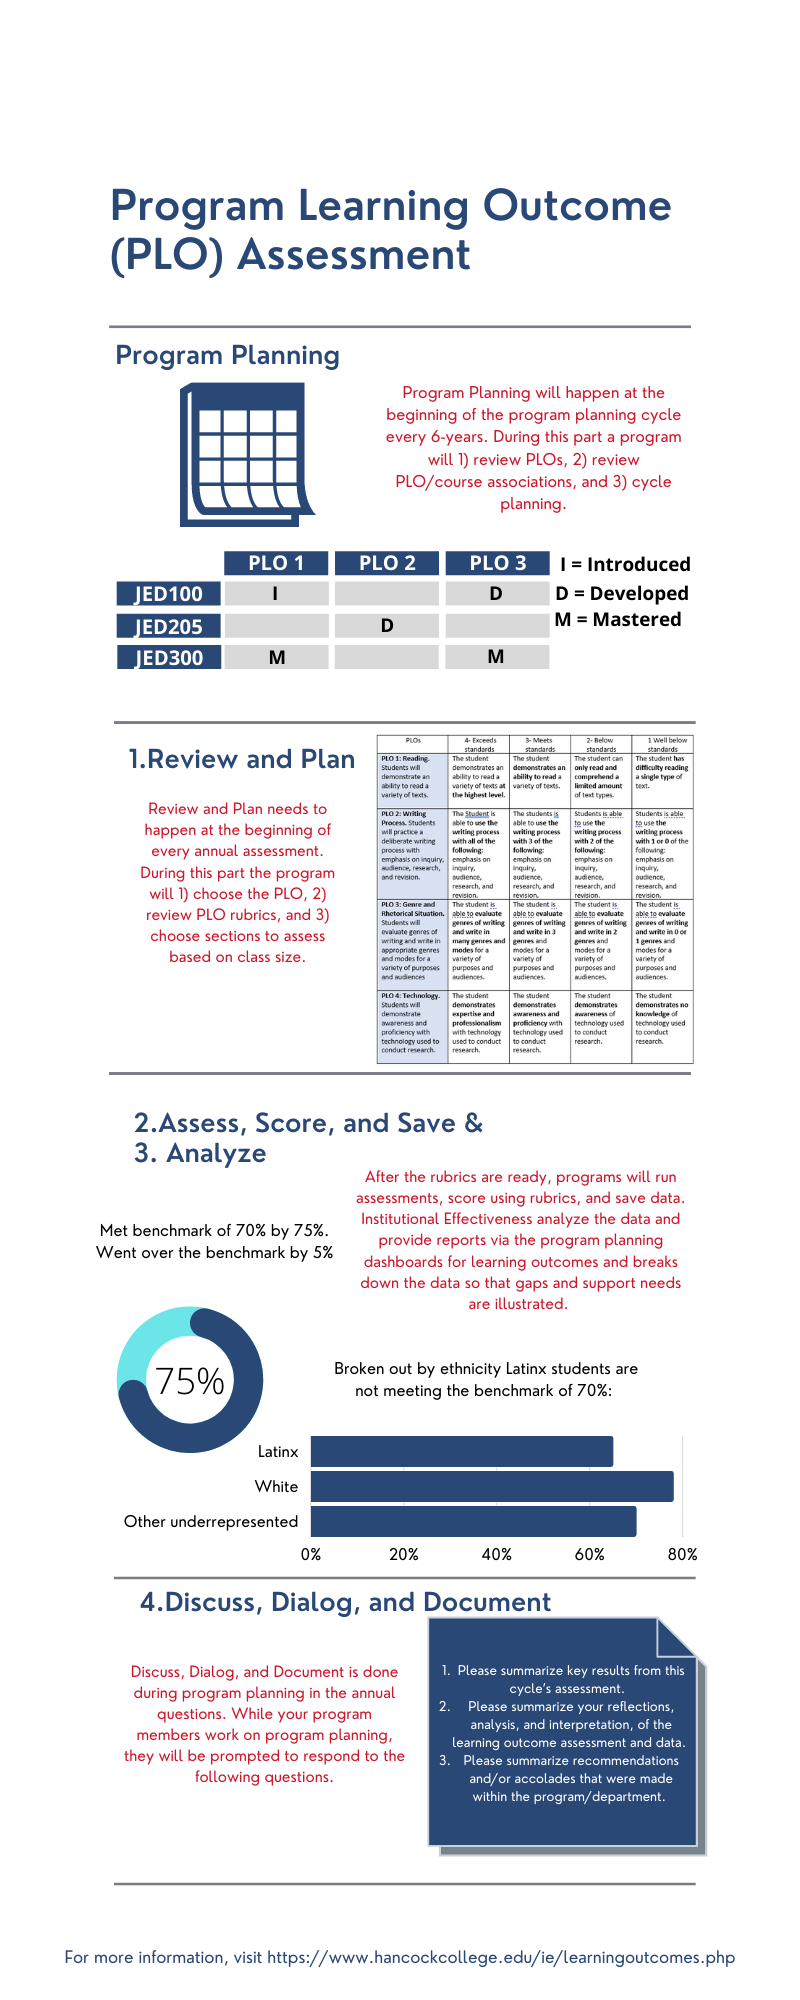 Assessment Cycle Dashboard Infographic 